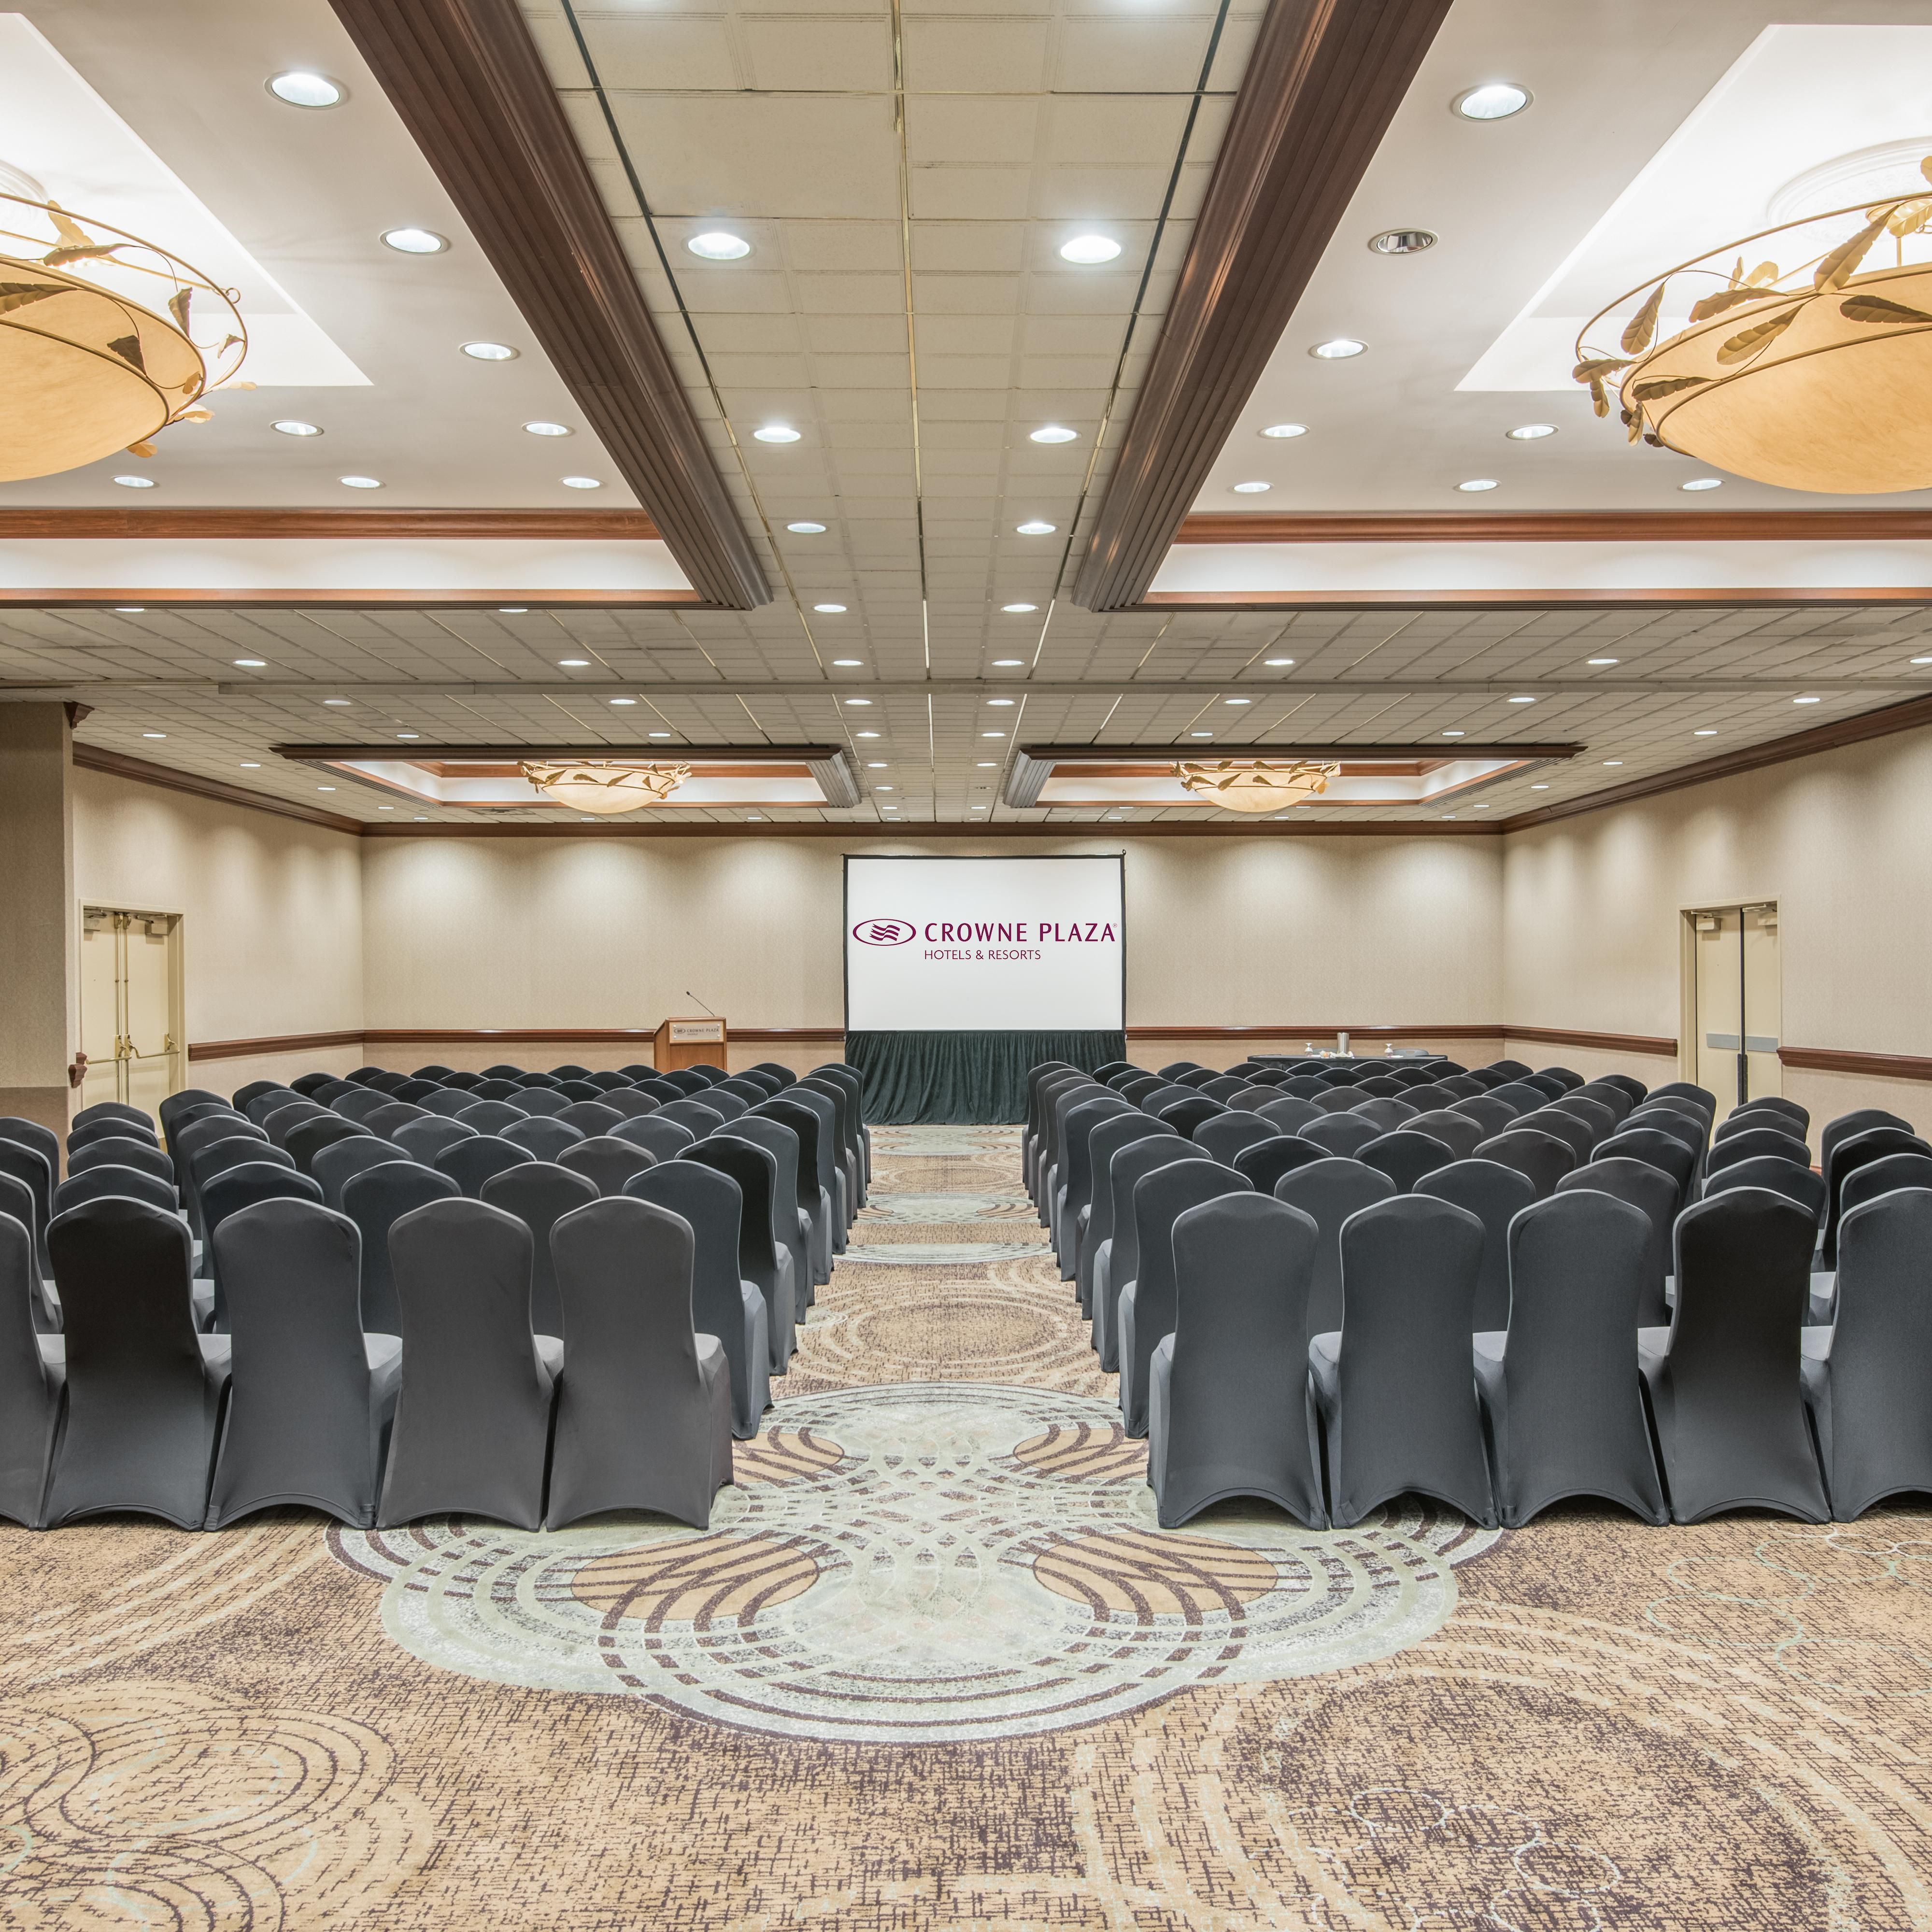 The Grand Ballroom can accommodate up to 1,200 people.